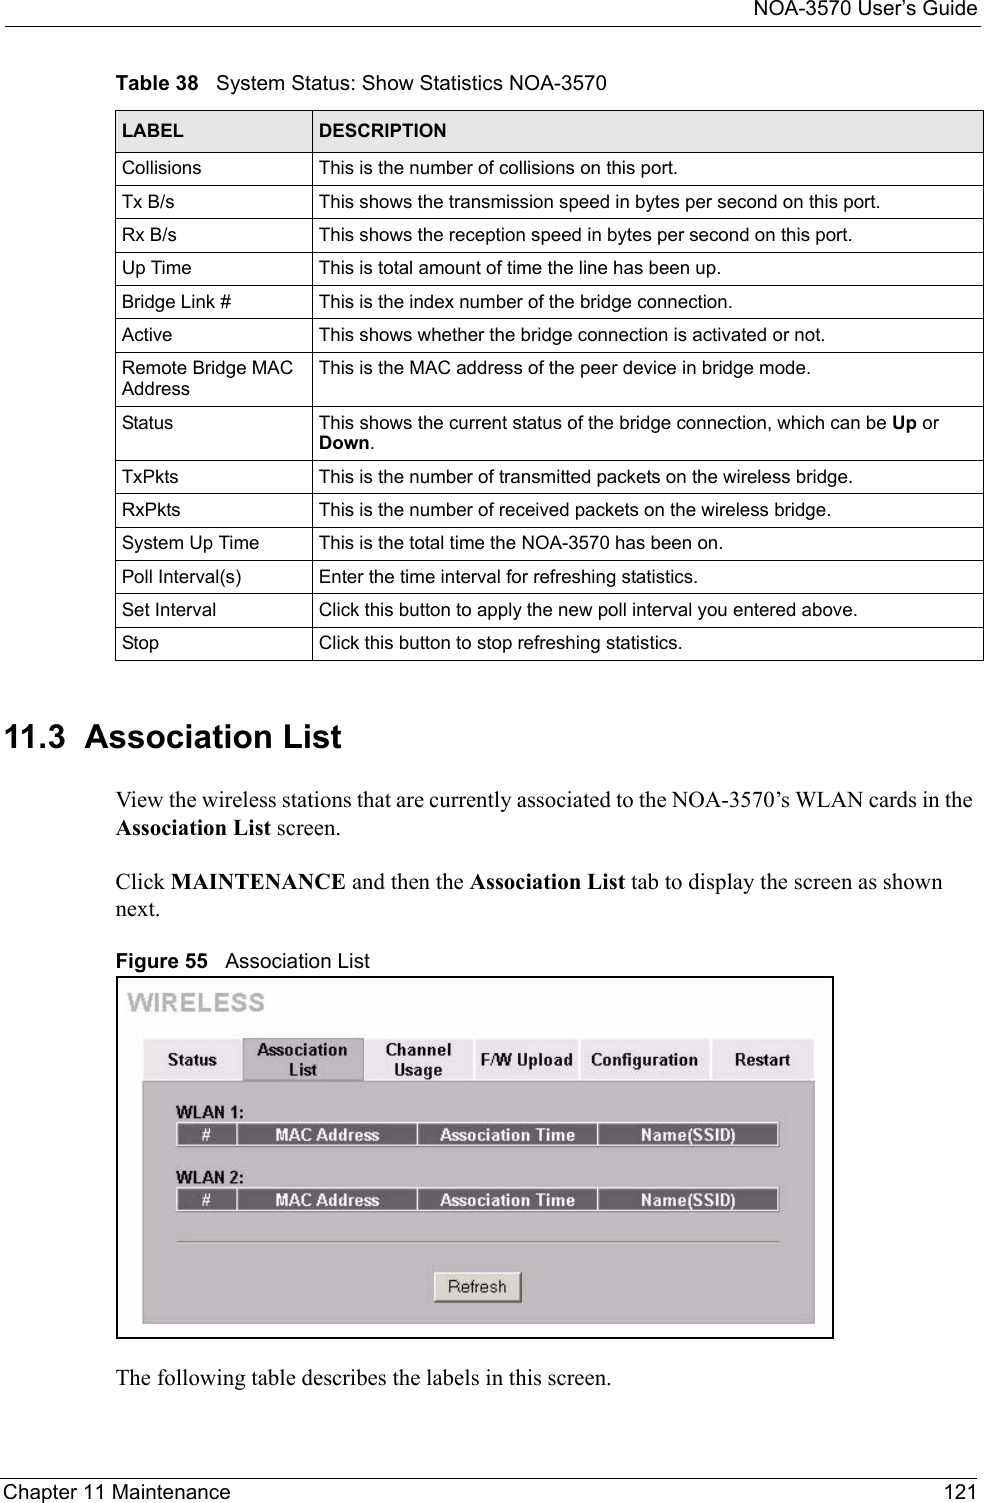 NOA-3570 User’s GuideChapter 11 Maintenance 12111.3  Association ListView the wireless stations that are currently associated to the NOA-3570’s WLAN cards in the Association List screen. Click MAINTENANCE and then the Association List tab to display the screen as shown next.Figure 55   Association ListThe following table describes the labels in this screen.Collisions This is the number of collisions on this port.Tx B/s This shows the transmission speed in bytes per second on this port.Rx B/s This shows the reception speed in bytes per second on this port.Up Time This is total amount of time the line has been up.Bridge Link # This is the index number of the bridge connection.Active This shows whether the bridge connection is activated or not.Remote Bridge MAC AddressThis is the MAC address of the peer device in bridge mode.Status This shows the current status of the bridge connection, which can be Up or Down.TxPkts This is the number of transmitted packets on the wireless bridge.RxPkts This is the number of received packets on the wireless bridge.System Up Time This is the total time the NOA-3570 has been on.Poll Interval(s) Enter the time interval for refreshing statistics.Set Interval Click this button to apply the new poll interval you entered above.Stop Click this button to stop refreshing statistics.Table 38   System Status: Show Statistics NOA-3570LABEL DESCRIPTION